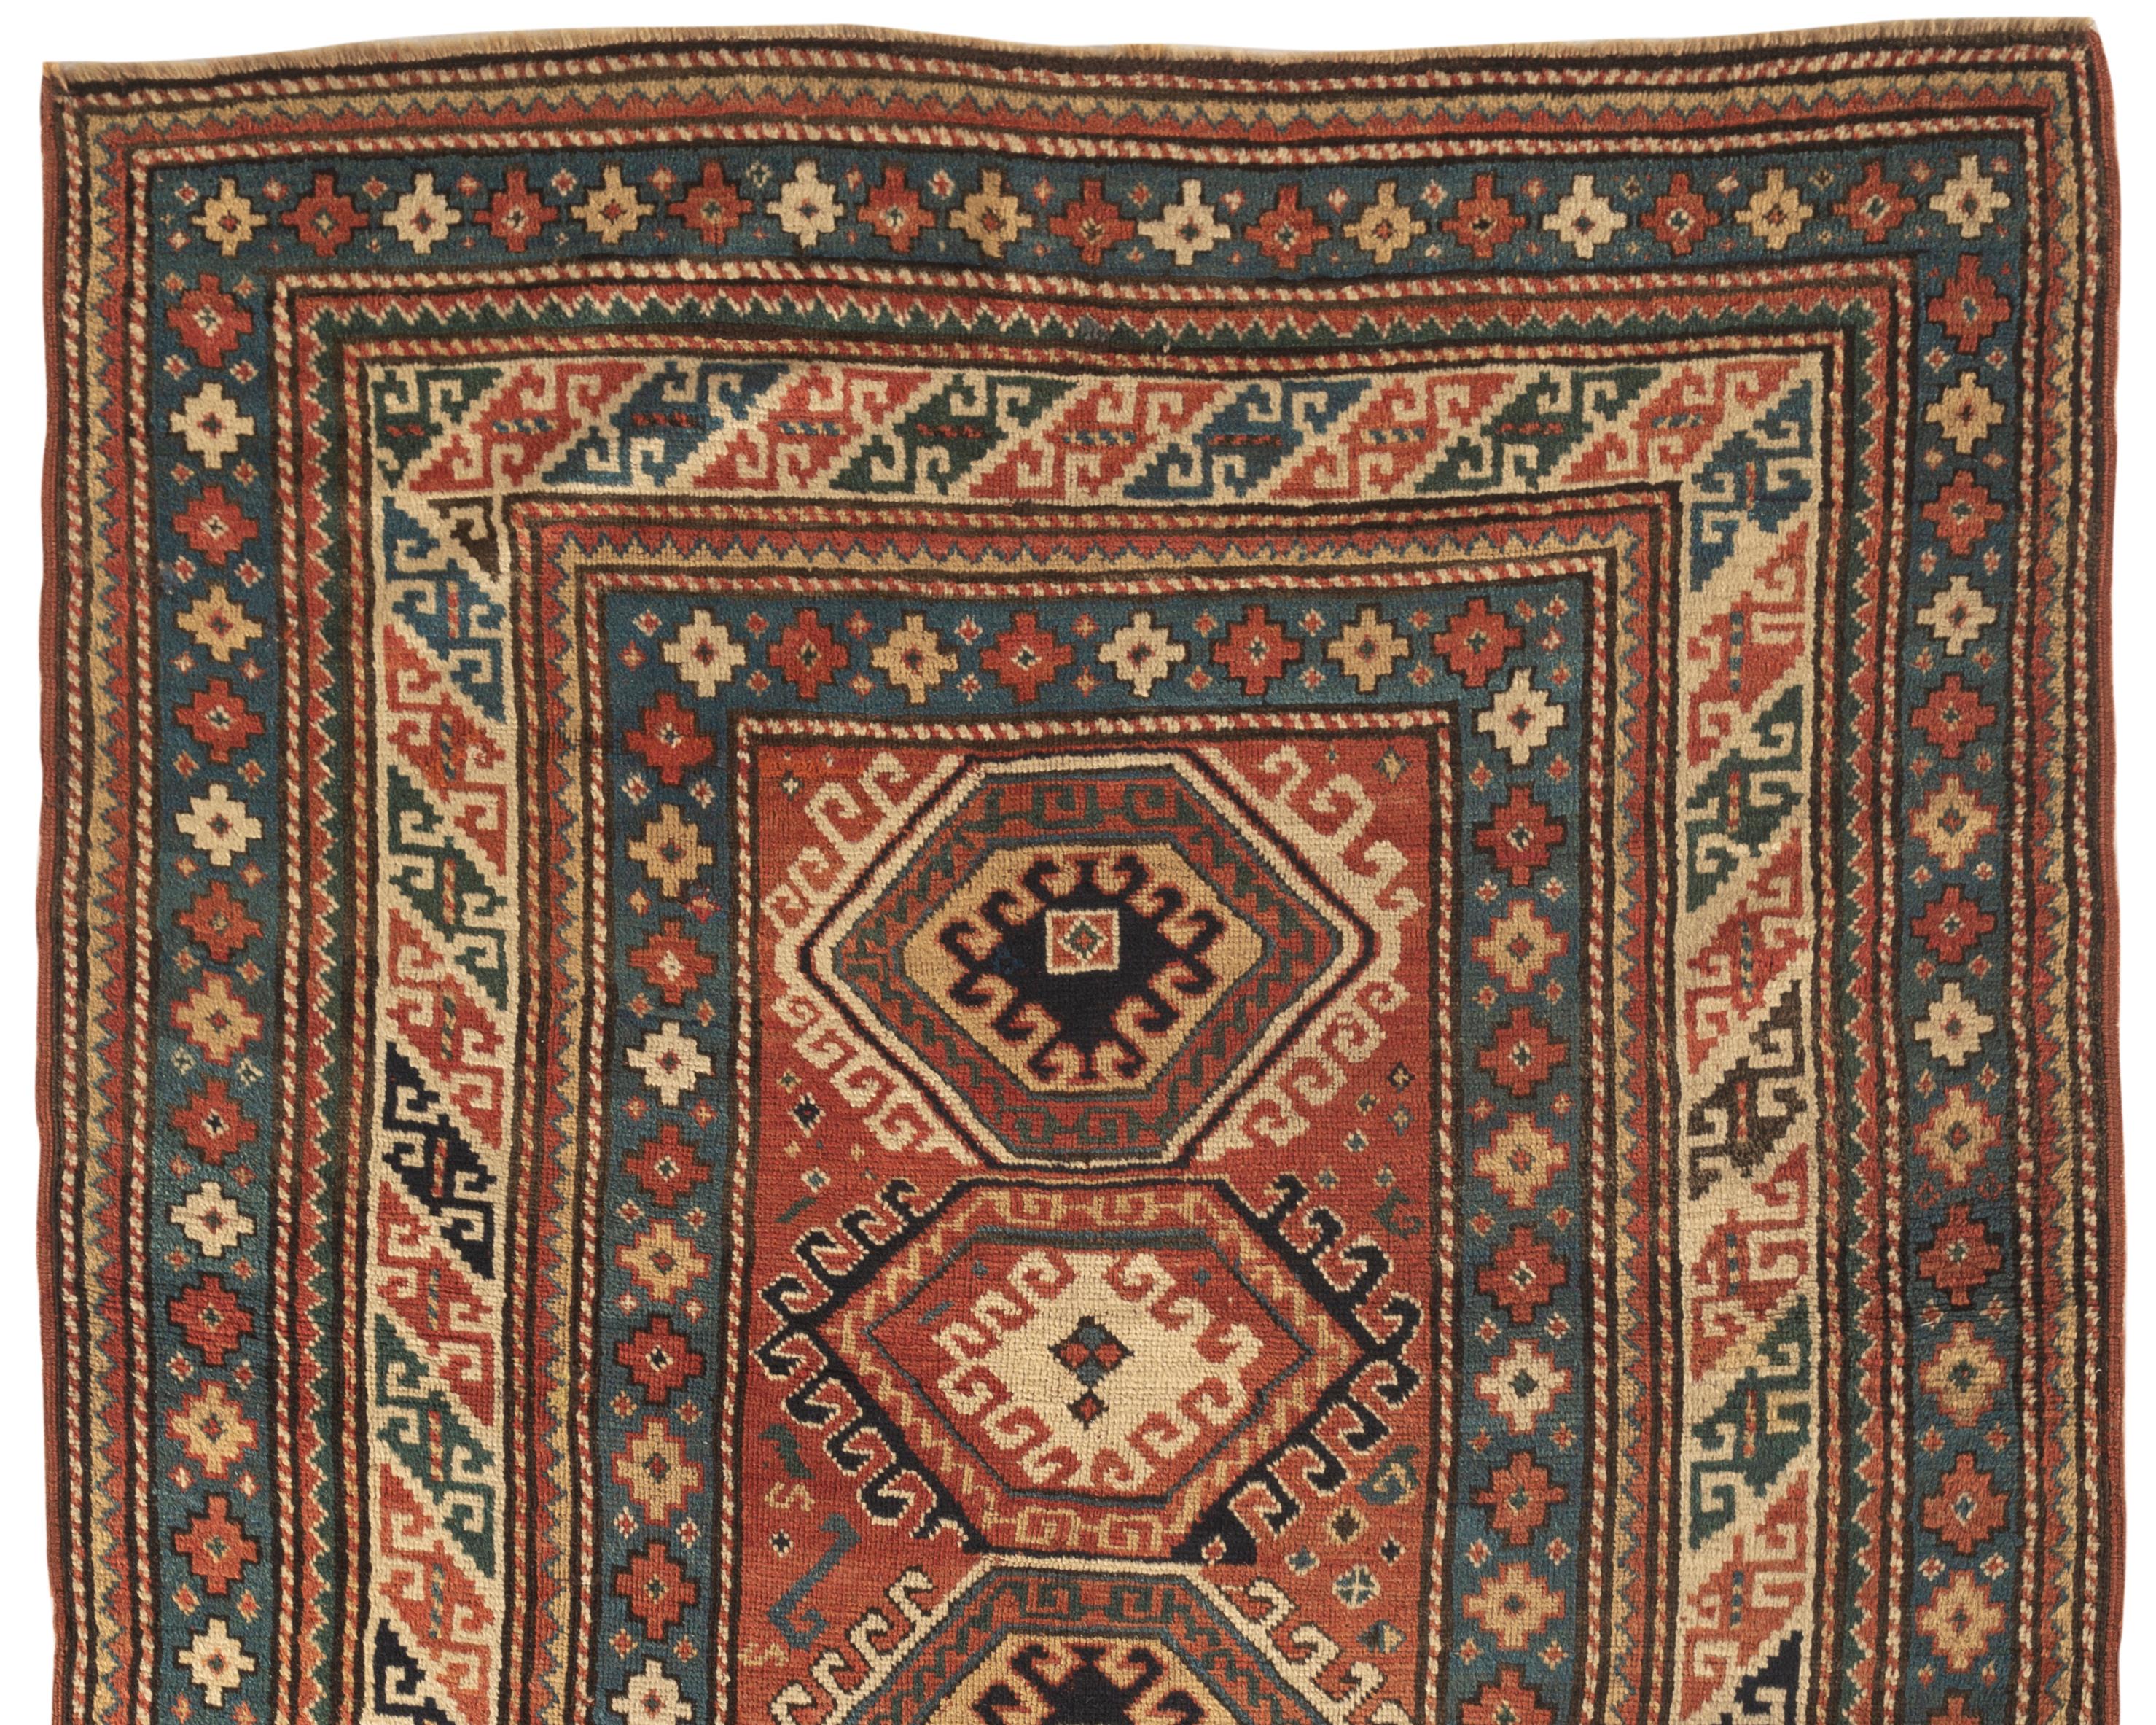 Antique Caucasian Kazak rug, circa 1880. A south west Caucasian Kazak handwoven rug circa 1880 with a truly amazing and intricate design from the central field almost exploding outward with the multiple borders to create a magnificent small piece of